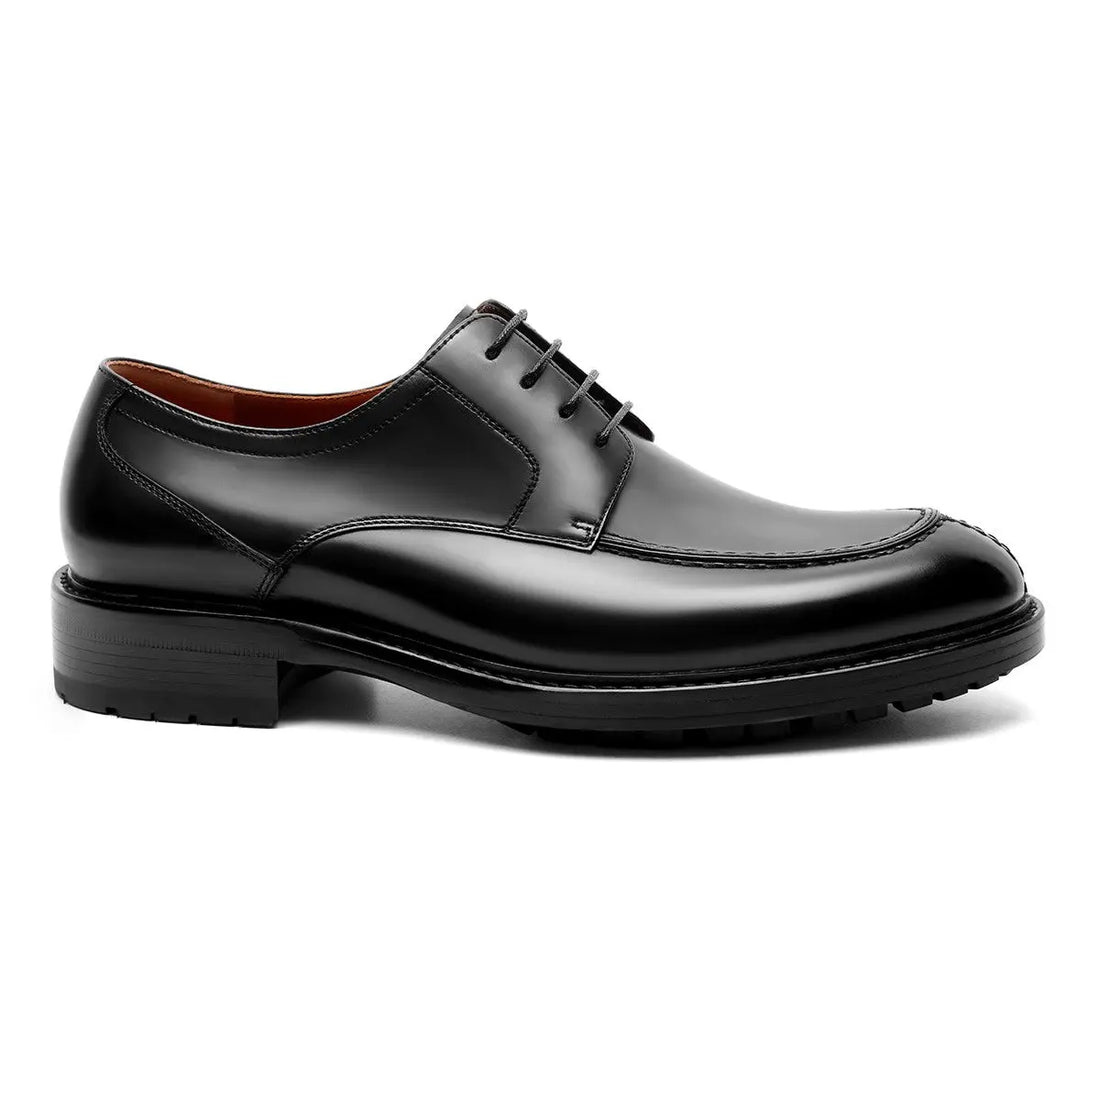 Men's Lace Up Calfskin Soft Derby Shoes Formal Leather Shoes 212201A LEIZILEI